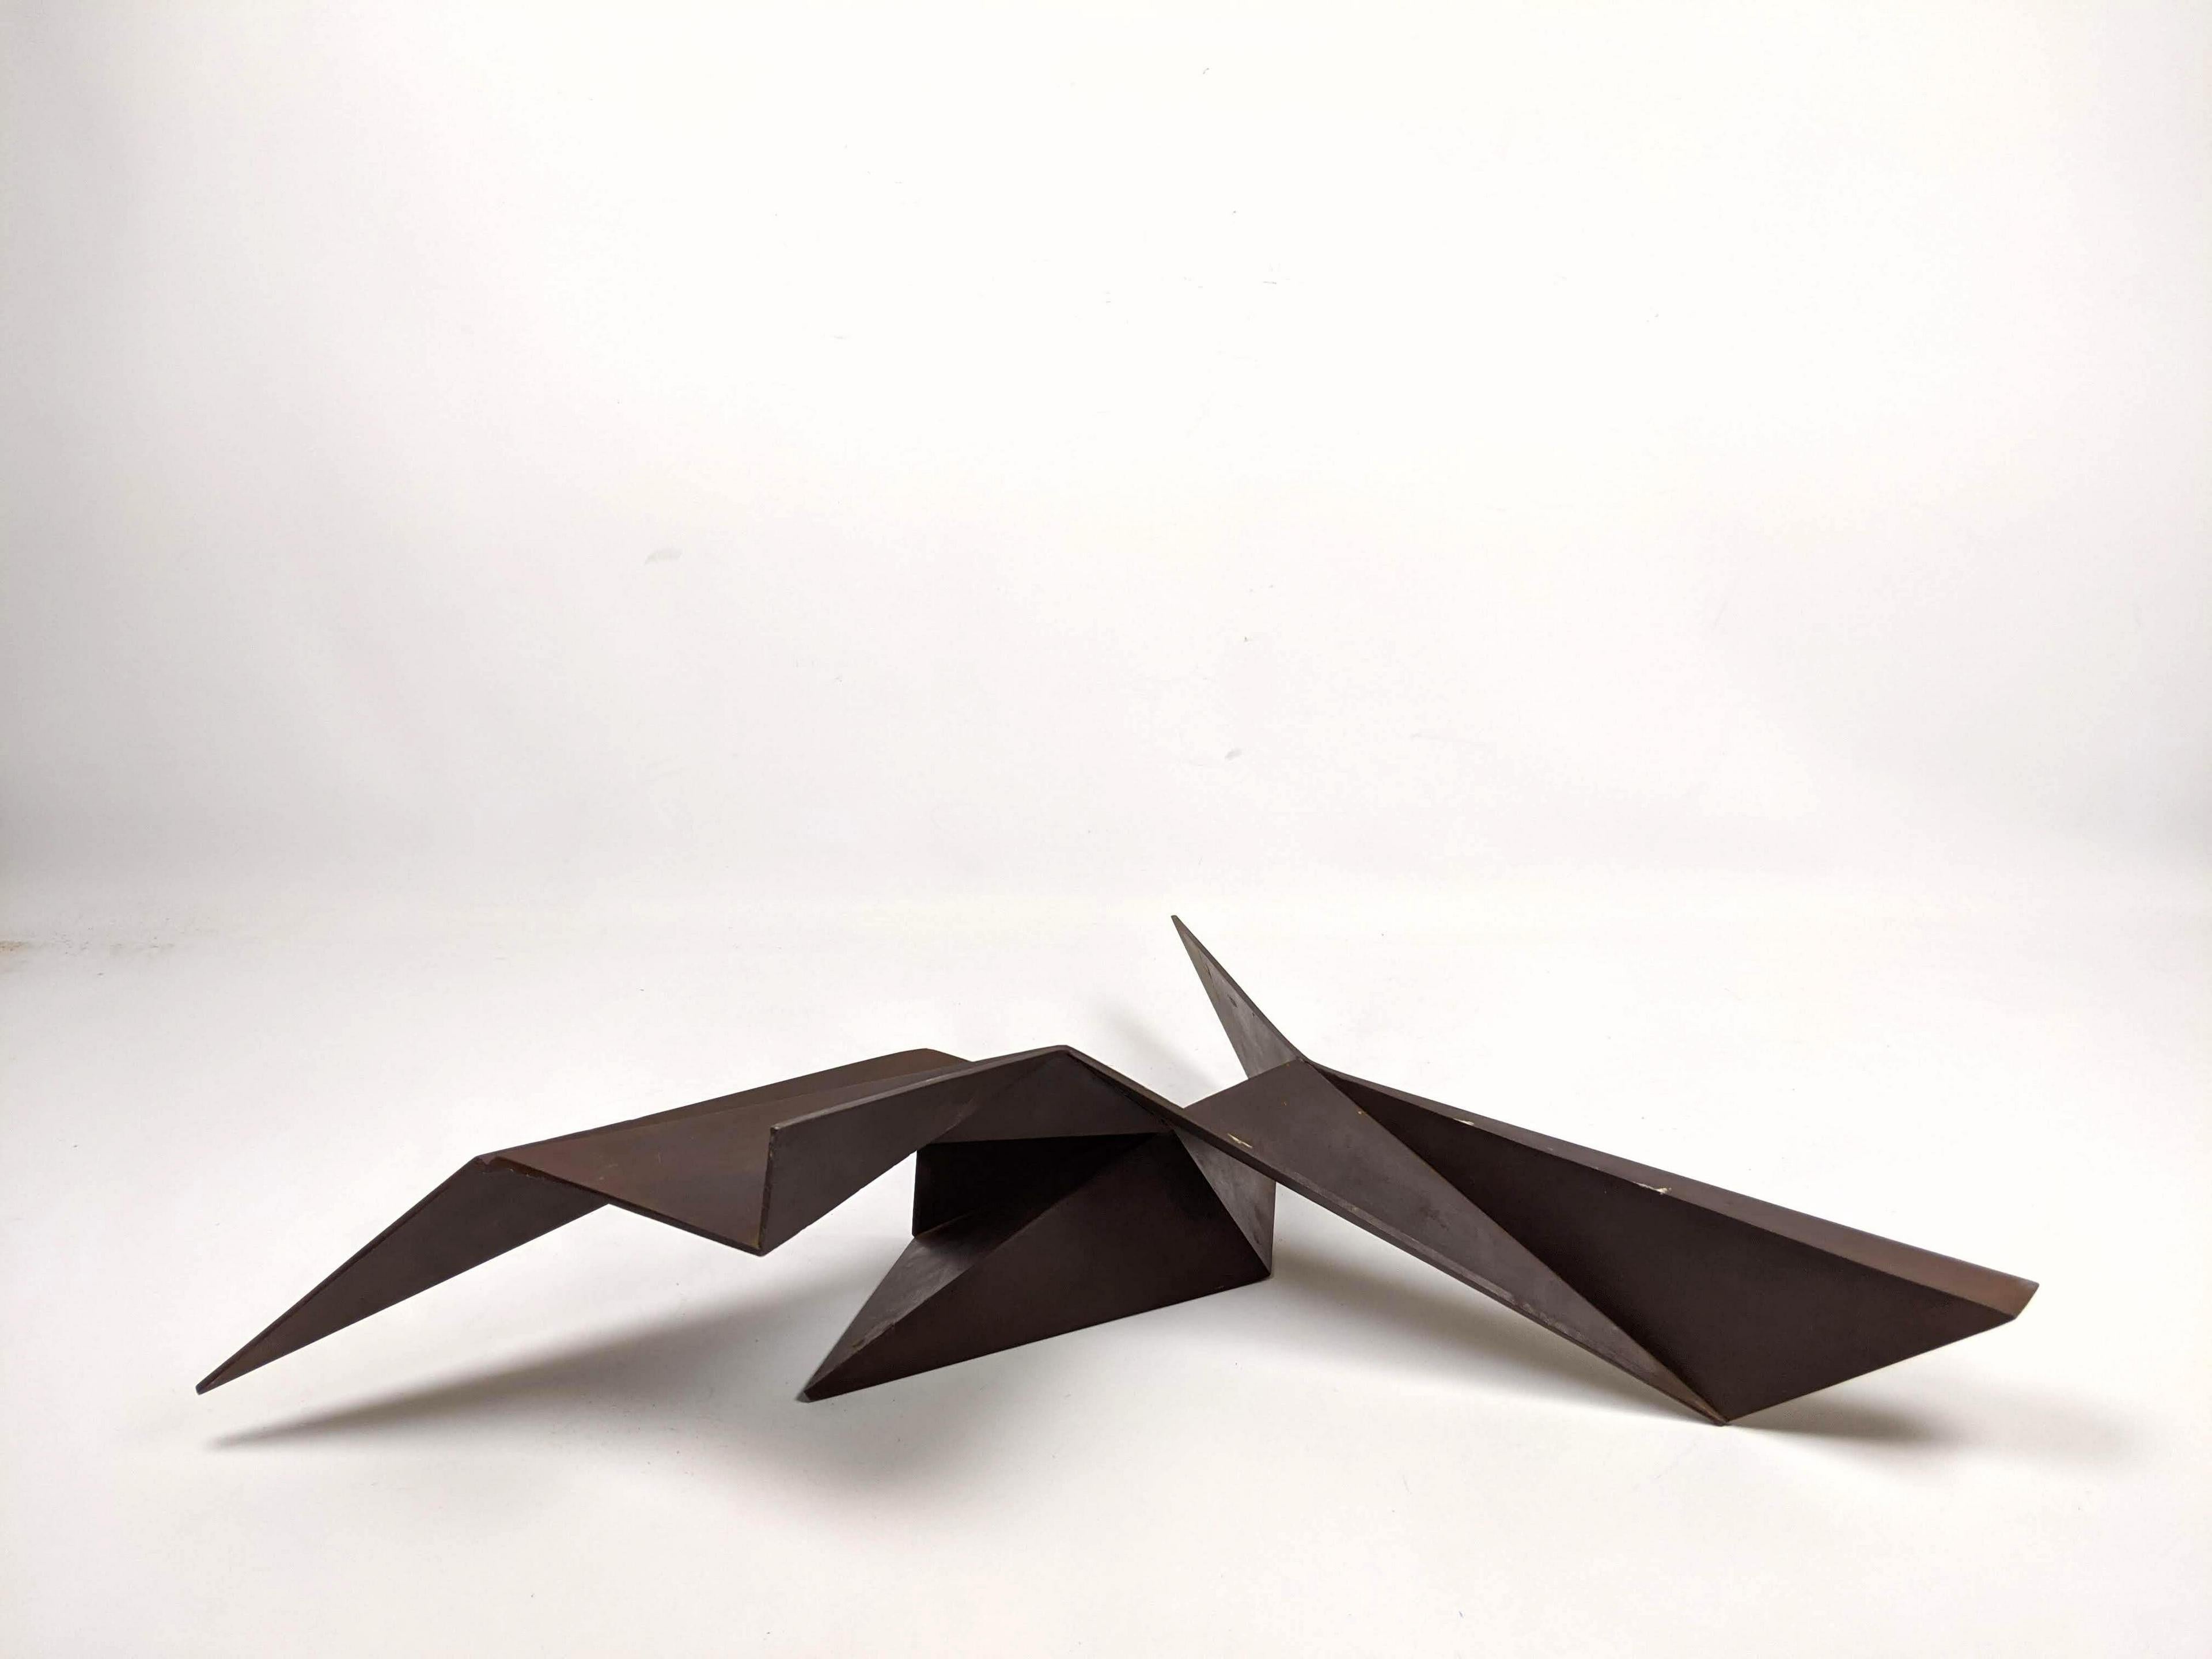 Gerald DiGiusto (1929 - 1987) 
Signed and dated abstract geometric COR-ten steel sculpture, (an all weather steel appropriate for outdoor use)
This can sit on the floor or be hung as a wall hanging sculpture. there is currently no hardware for